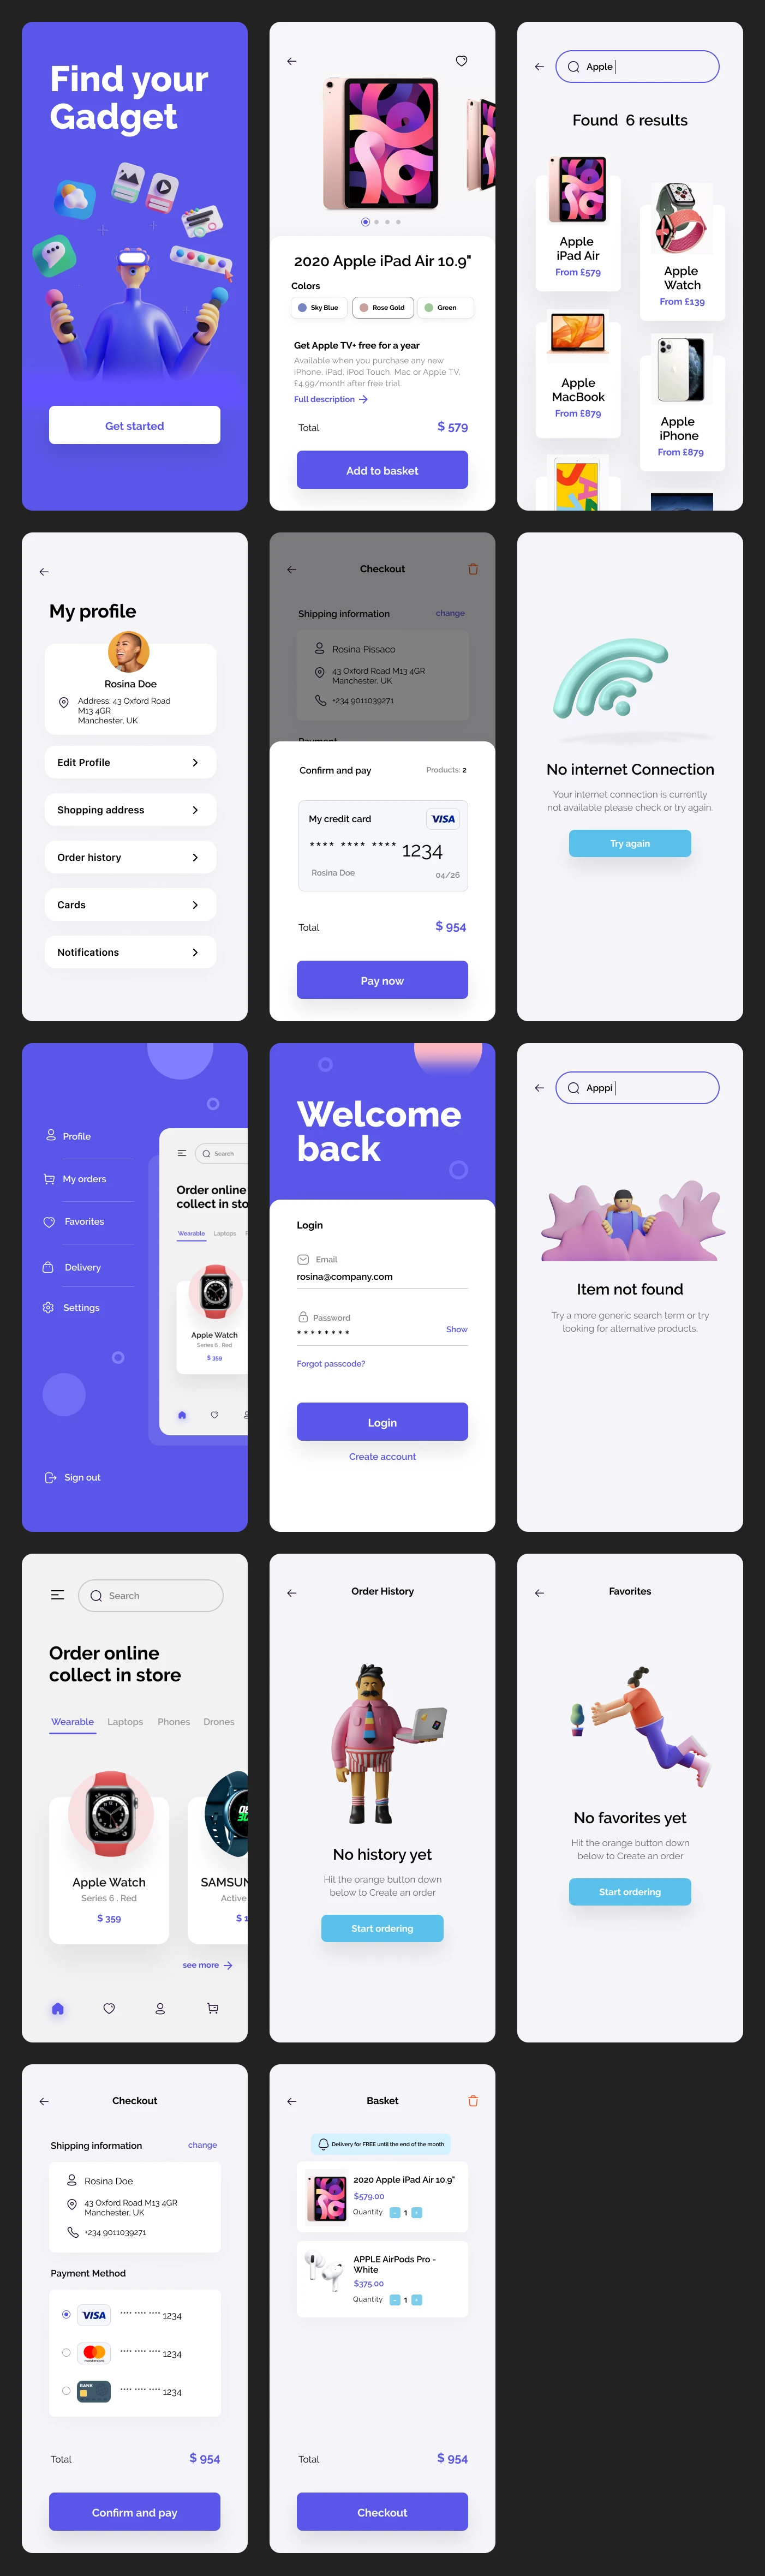 eCommerce Free App UI Kit for Figma - Free mobile UI Kit designed exclusively for Figma by Rosina Pissaco. It features 14+ mobile screen pages to get you started on your projects.